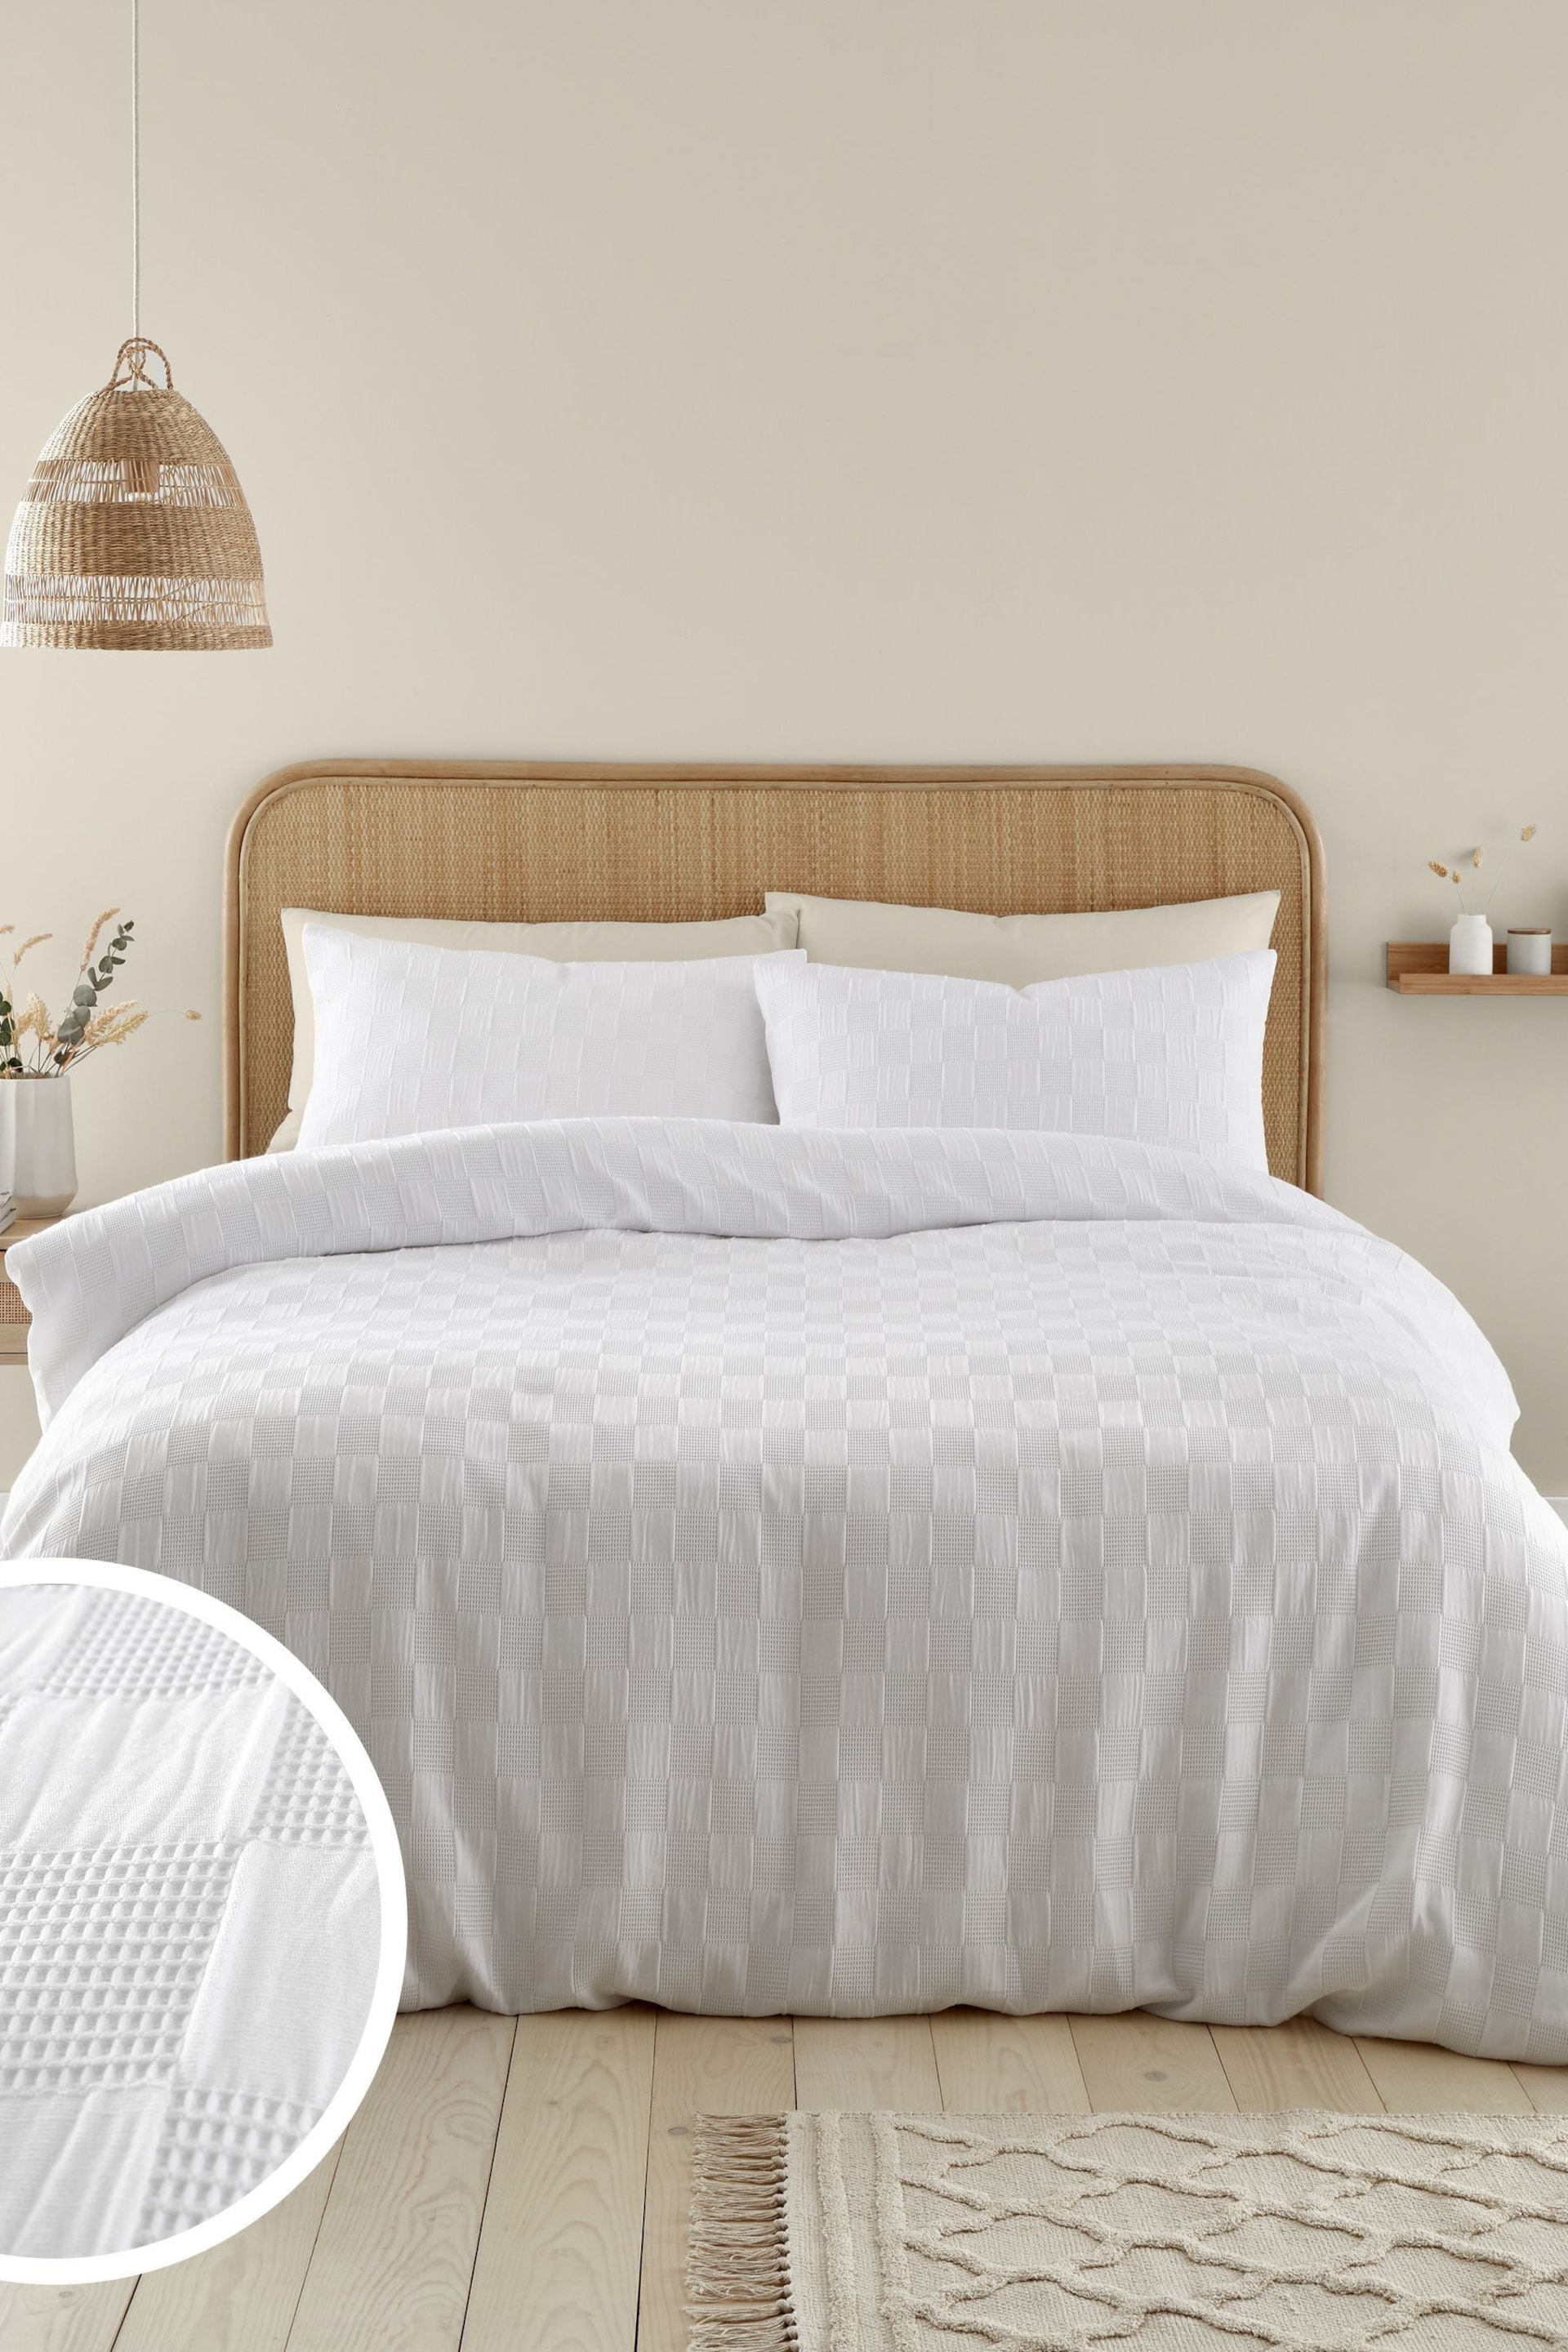 Catherine Lansfield White Waffle Checkerboard Duvet Cover Set - Image 1 of 5